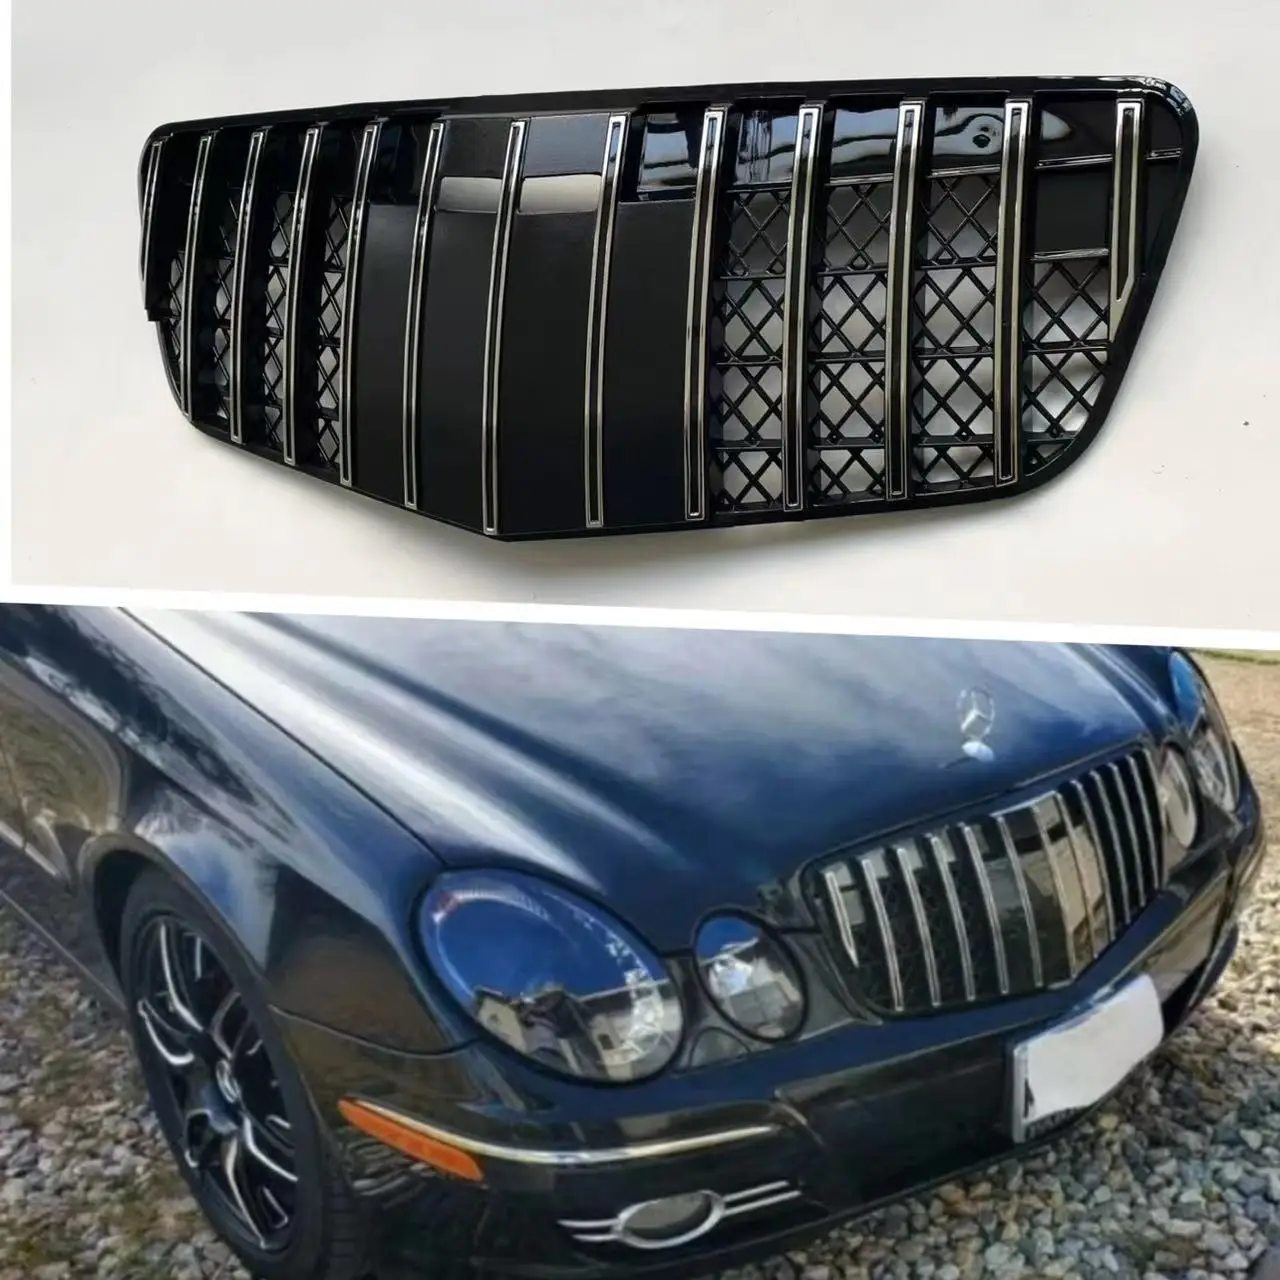 

For 2006-2008 E-class W211 Facelift Gt Vertical Bar Grille Replacement Of The Original Car